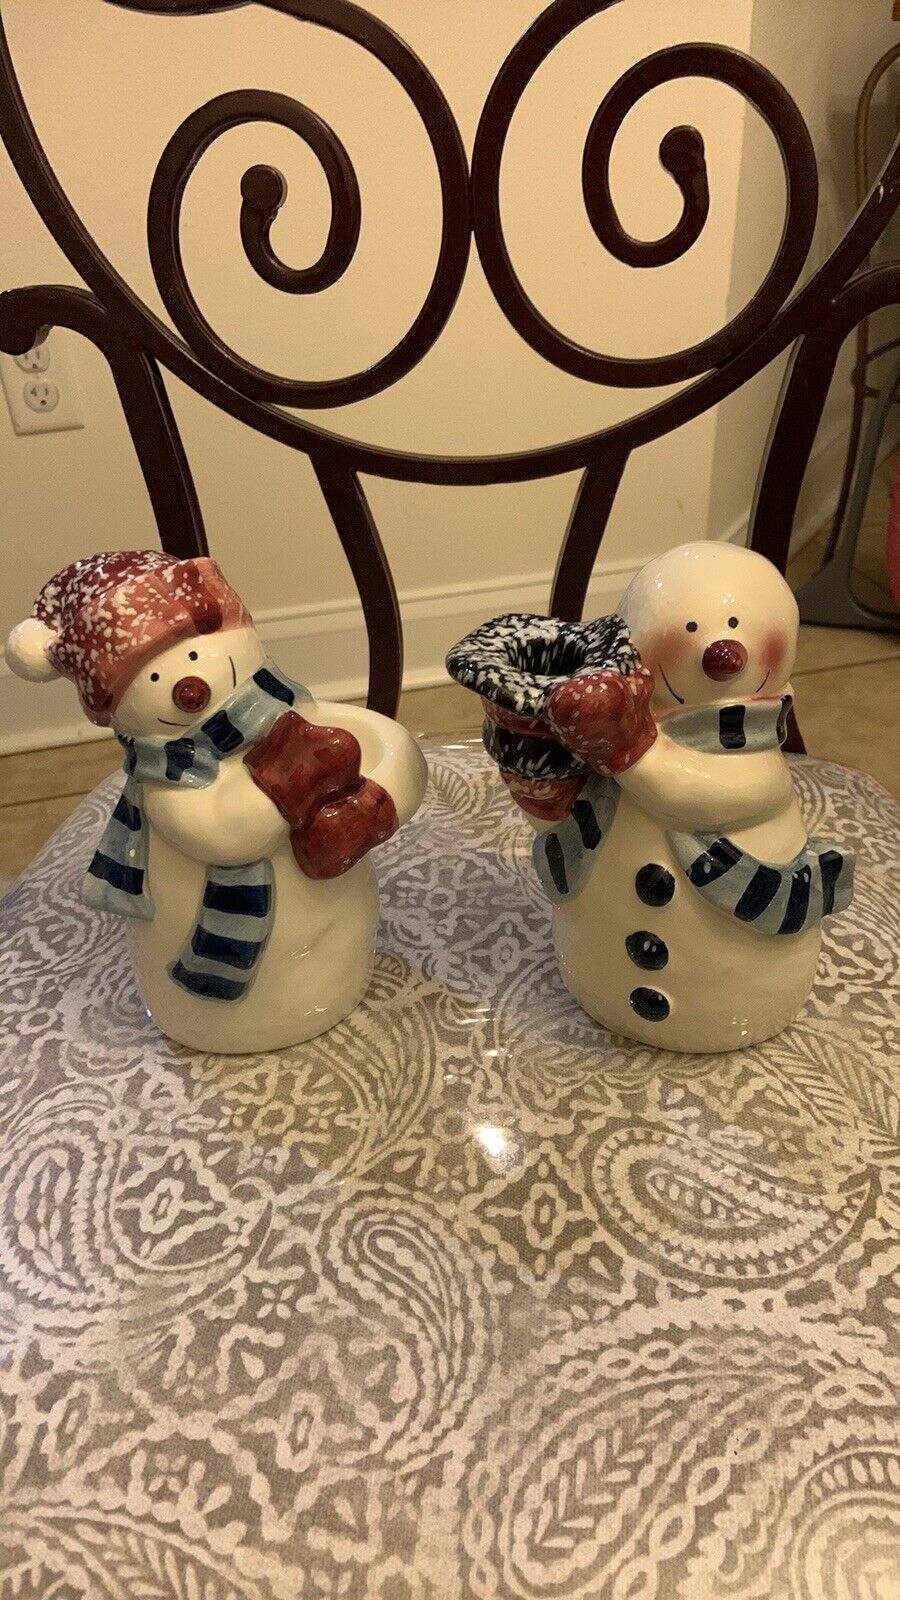 Set Snowman ⛄️ candle holders. Frosty. Christmas decorations 